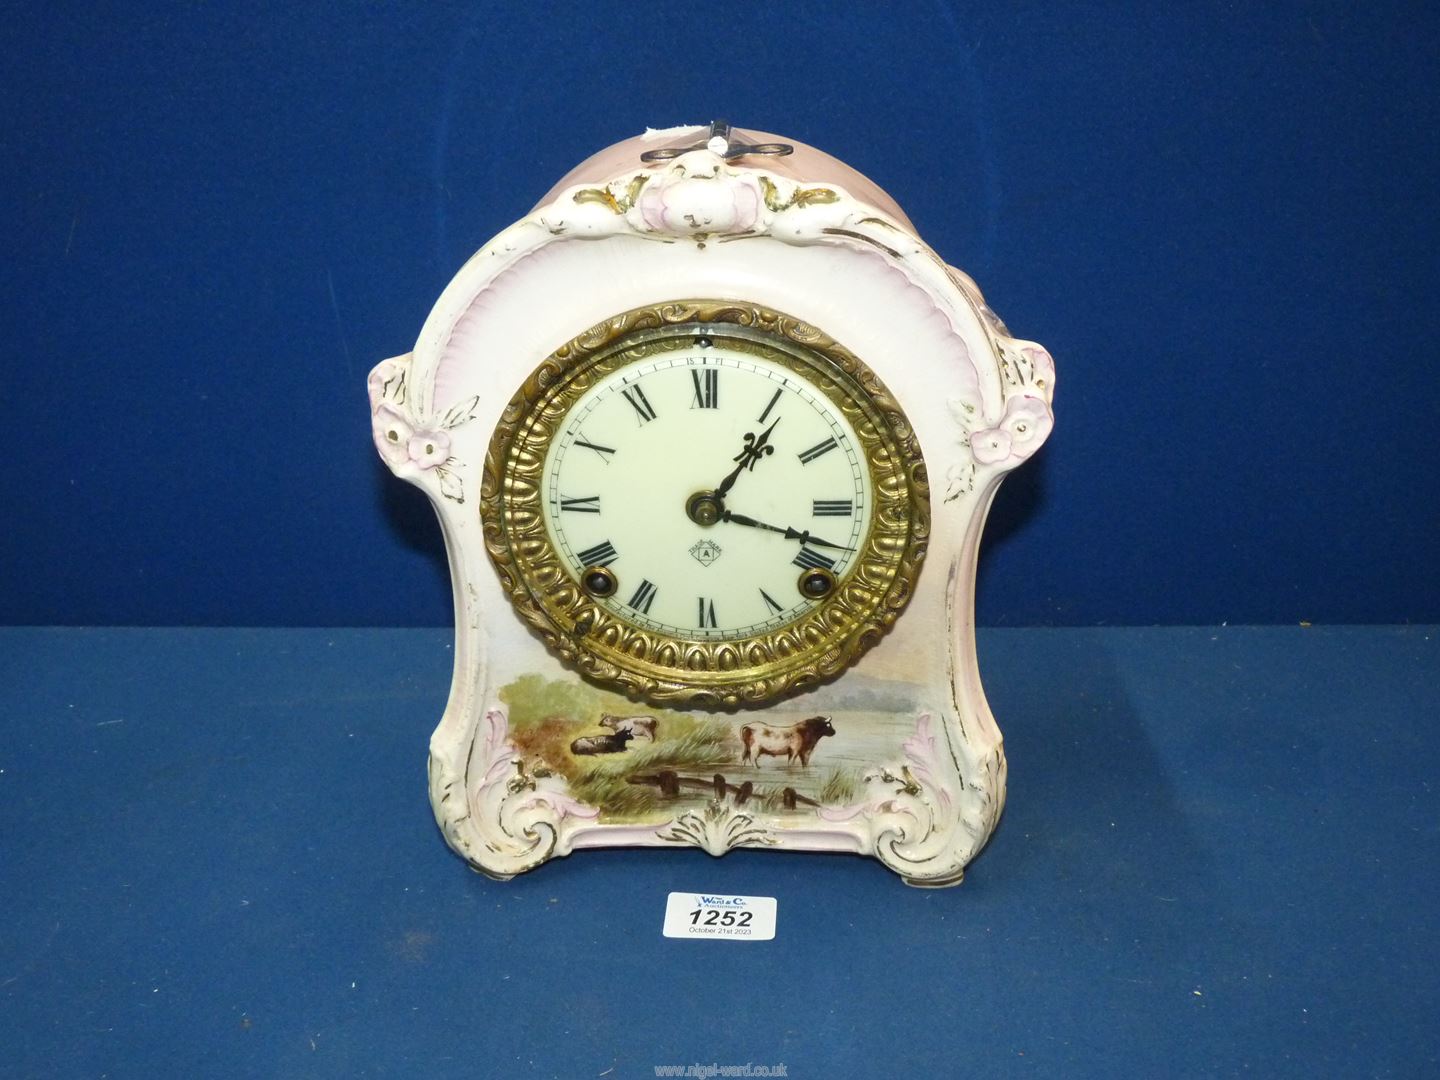 An Ansonia chiming Mantle Clock with Bonn china casing having Roman numerals to the cream face and